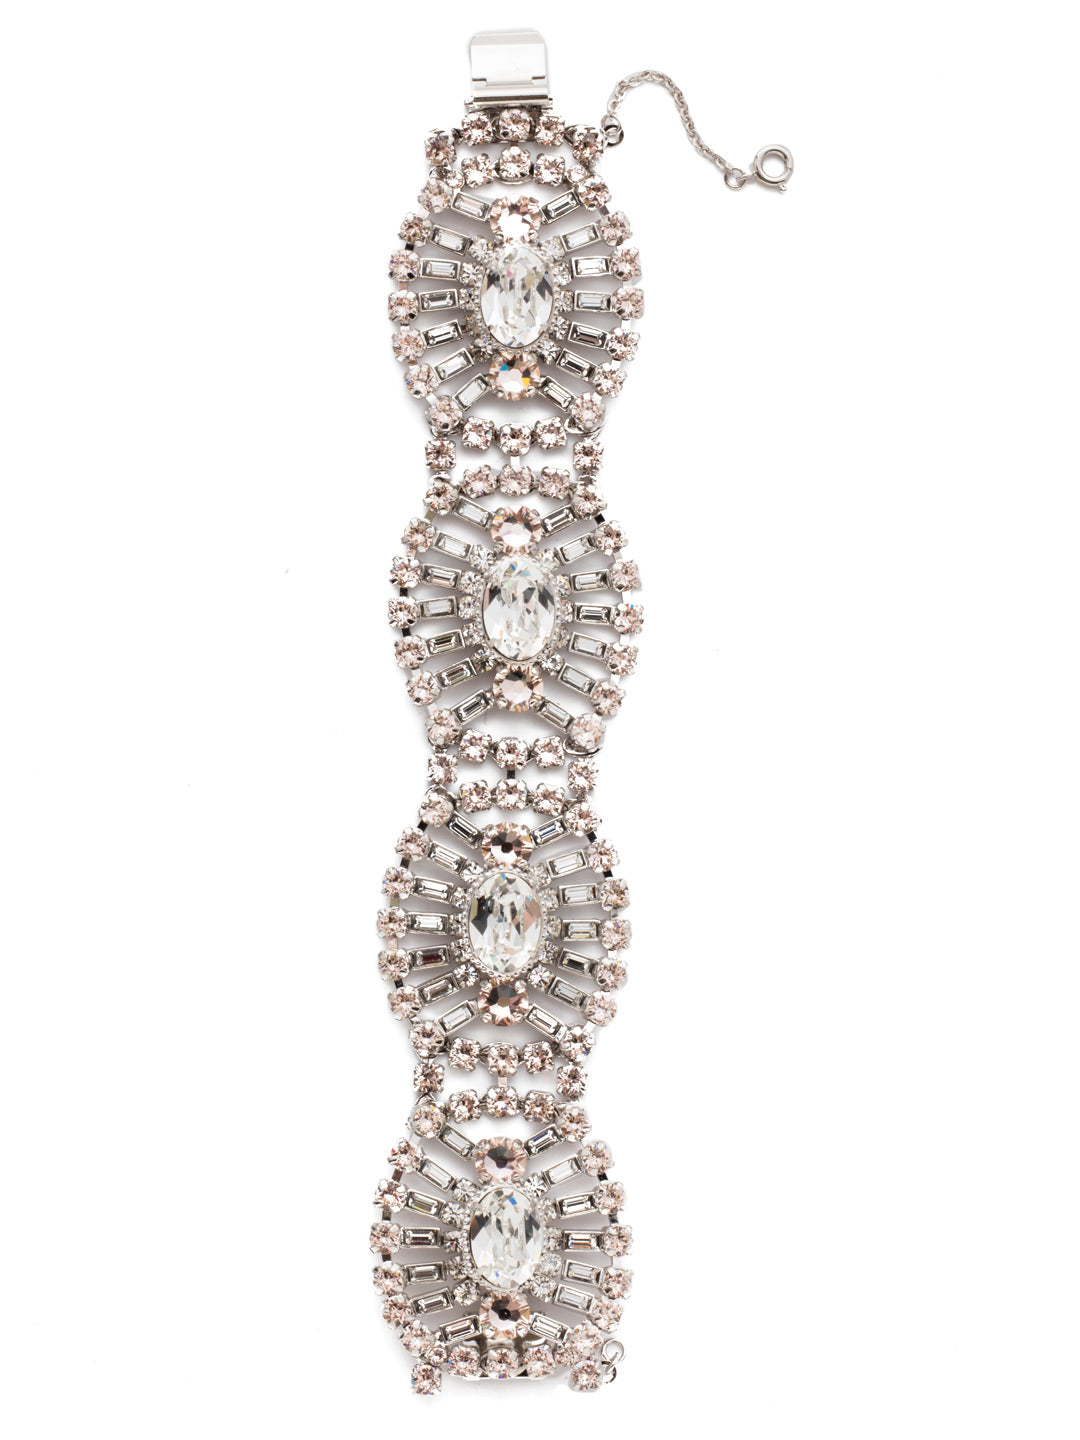 Gleaming Oval Layered Bracelet - BBZ48RHPLS - A bracelet that is sure to make a statement, this classic design features an oval stone in the center of each segment with a starburst of crystal baguettes surrounding each one. The result is a decoratively textured, vintage-inspired piece that will dazzle from every angle. From Sorrelli's Soft Petal collection in our Palladium Silver-tone finish.